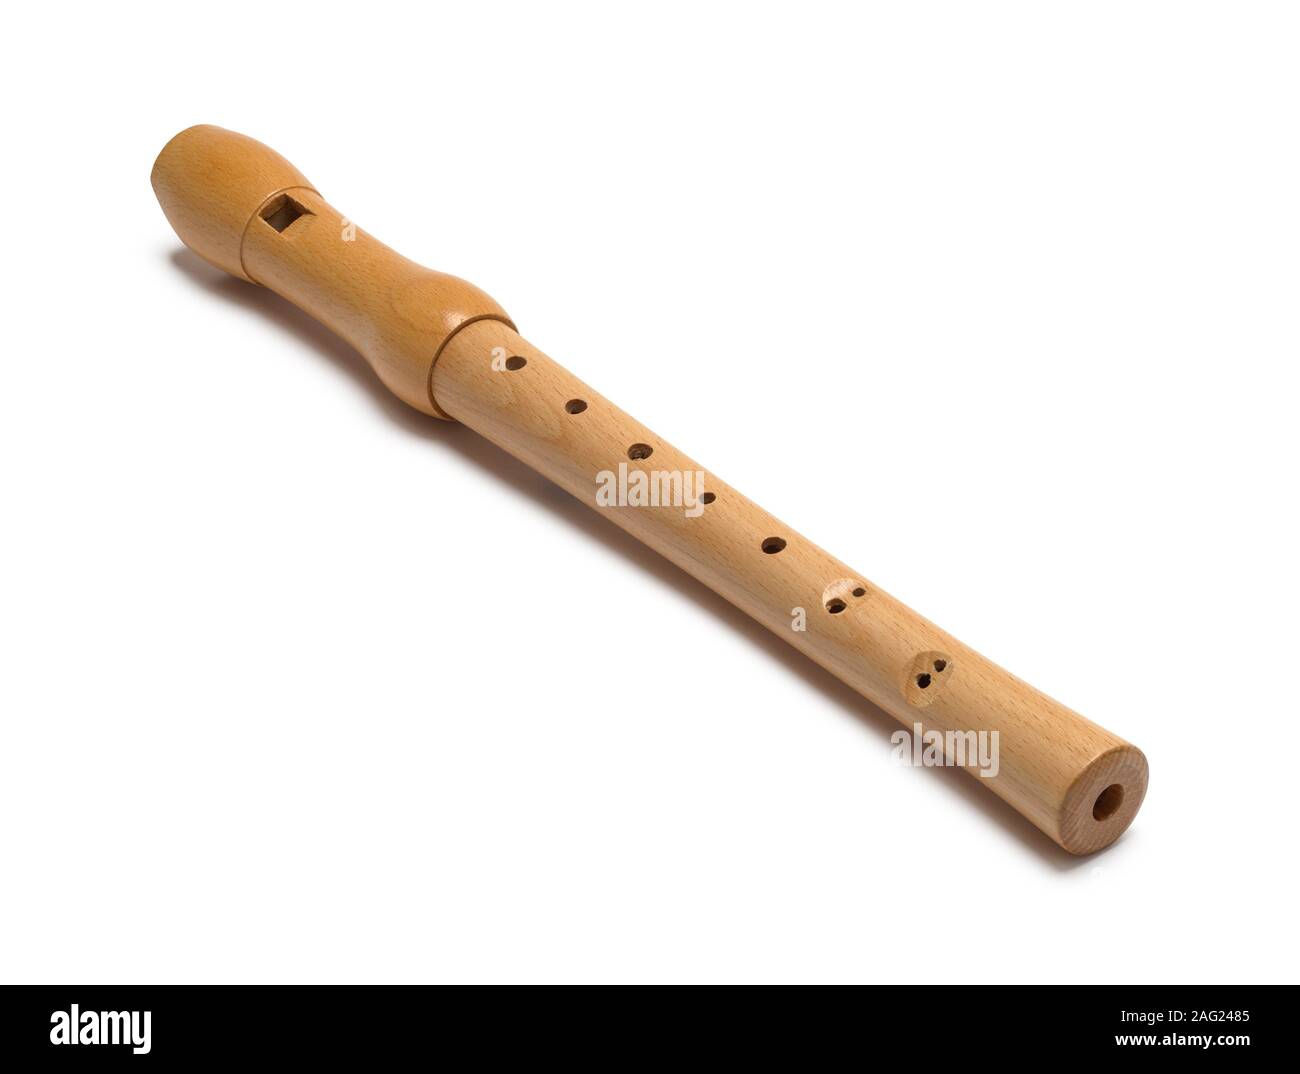 Wood Recorder Musical Instrument Isolated on White Background. Stock Photo